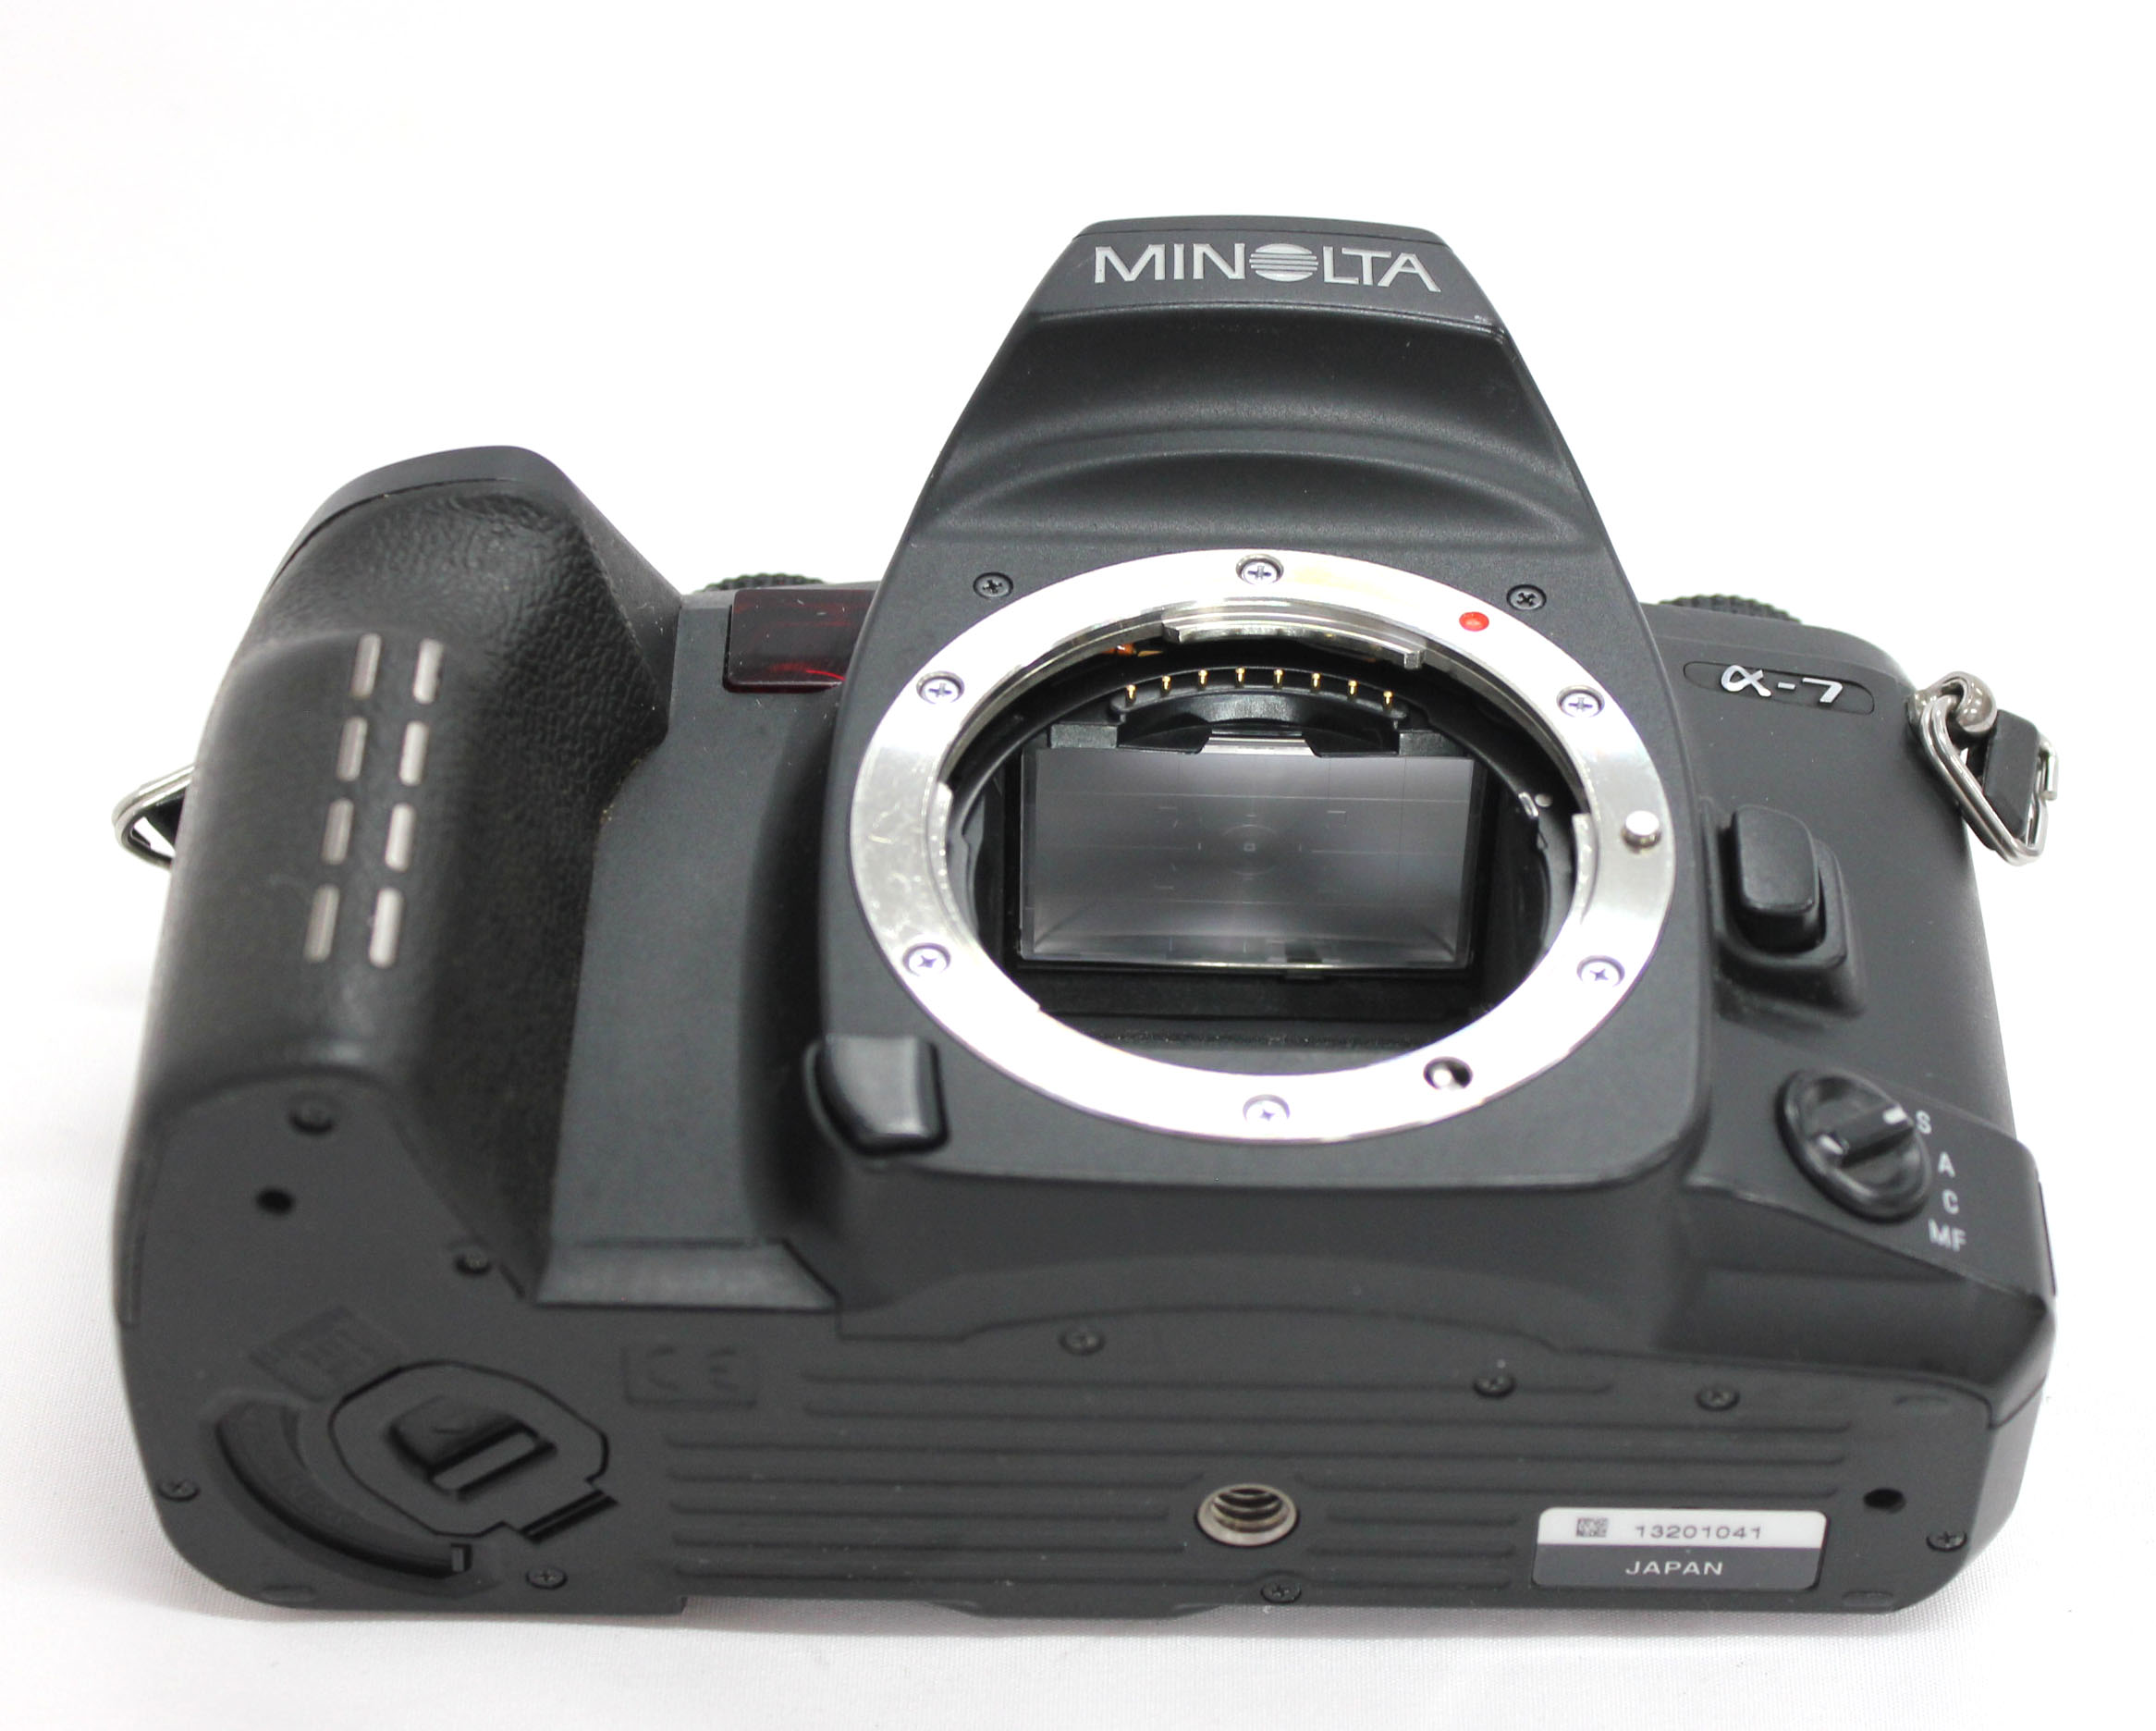  Minolta Maxxum 7 Dynax 7 a7 with AF Zoom 35-105mm F/3.5-4.5 from Japan Photo 9